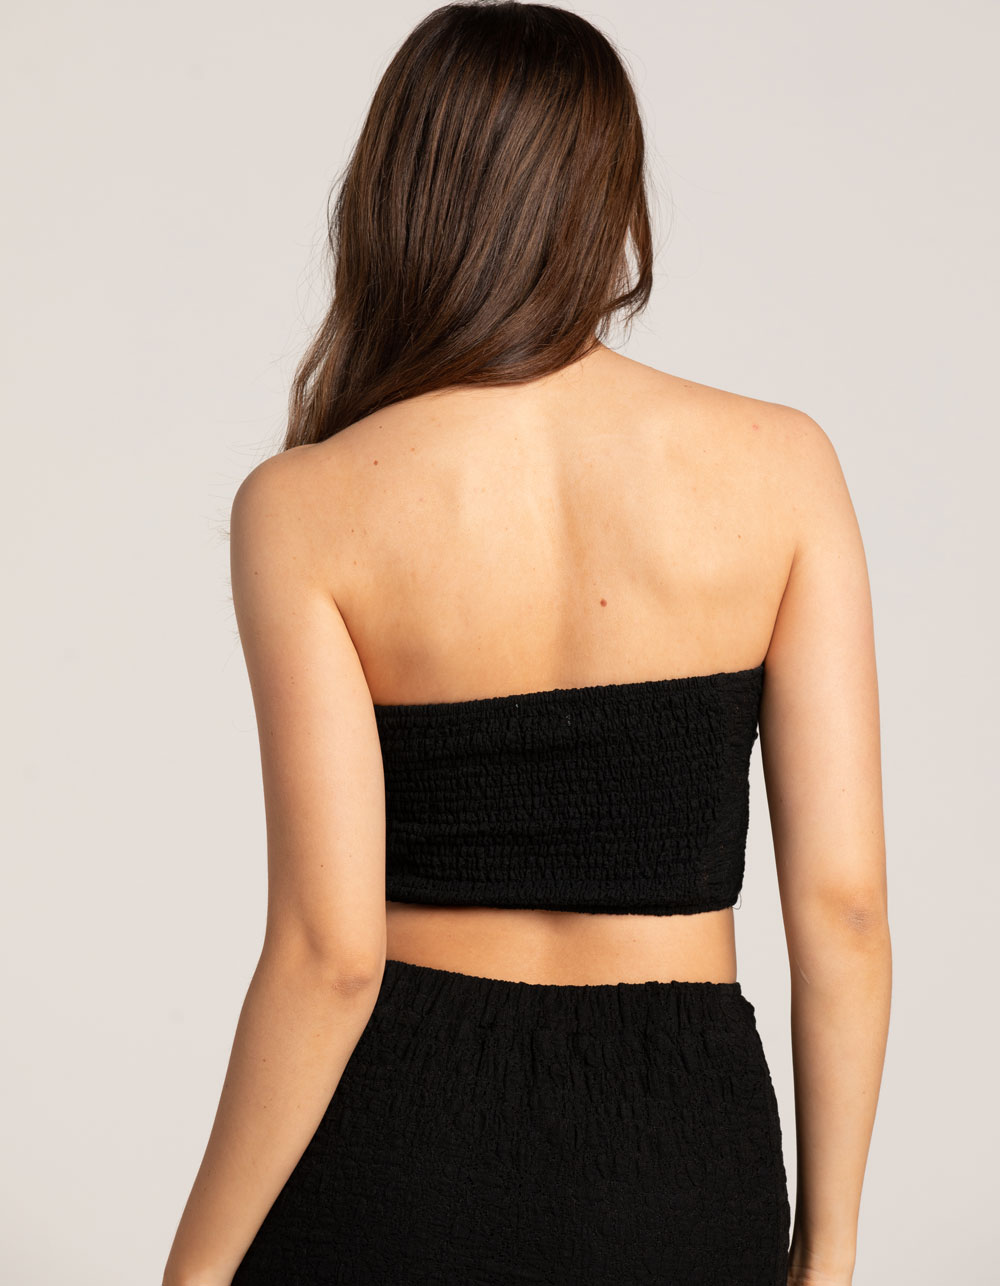 WEST OF MELROSE Textured Womens Tube Top